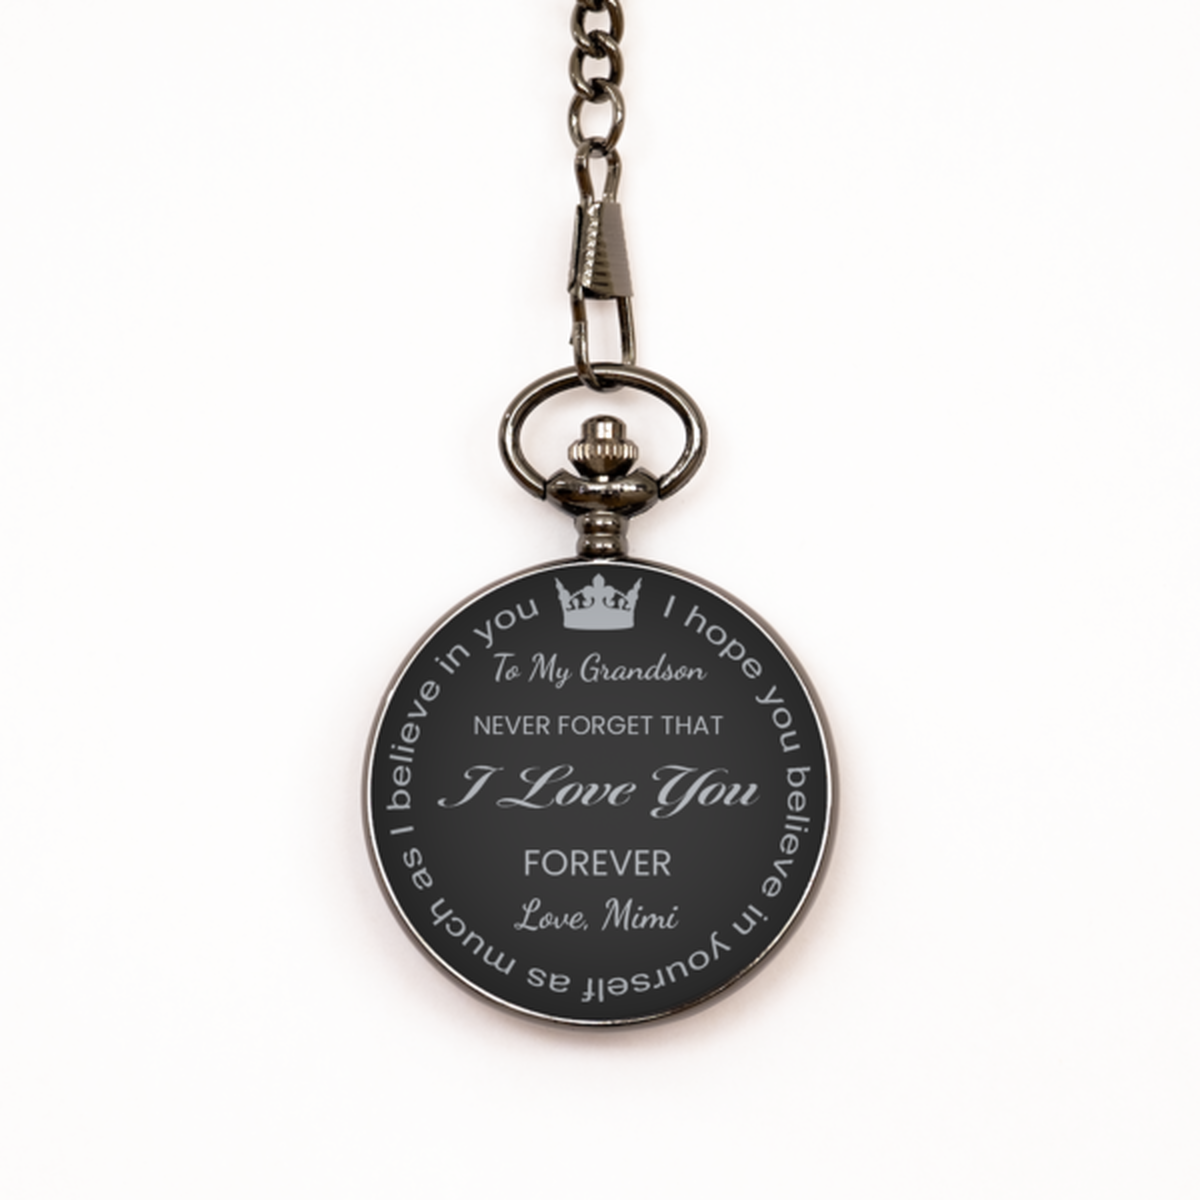 To My Grandson Pocket Watch from Mimi, Gift for Grandson, Black Engraved Pocket Watch, Believe in You, Birthday, Christmas Gift.